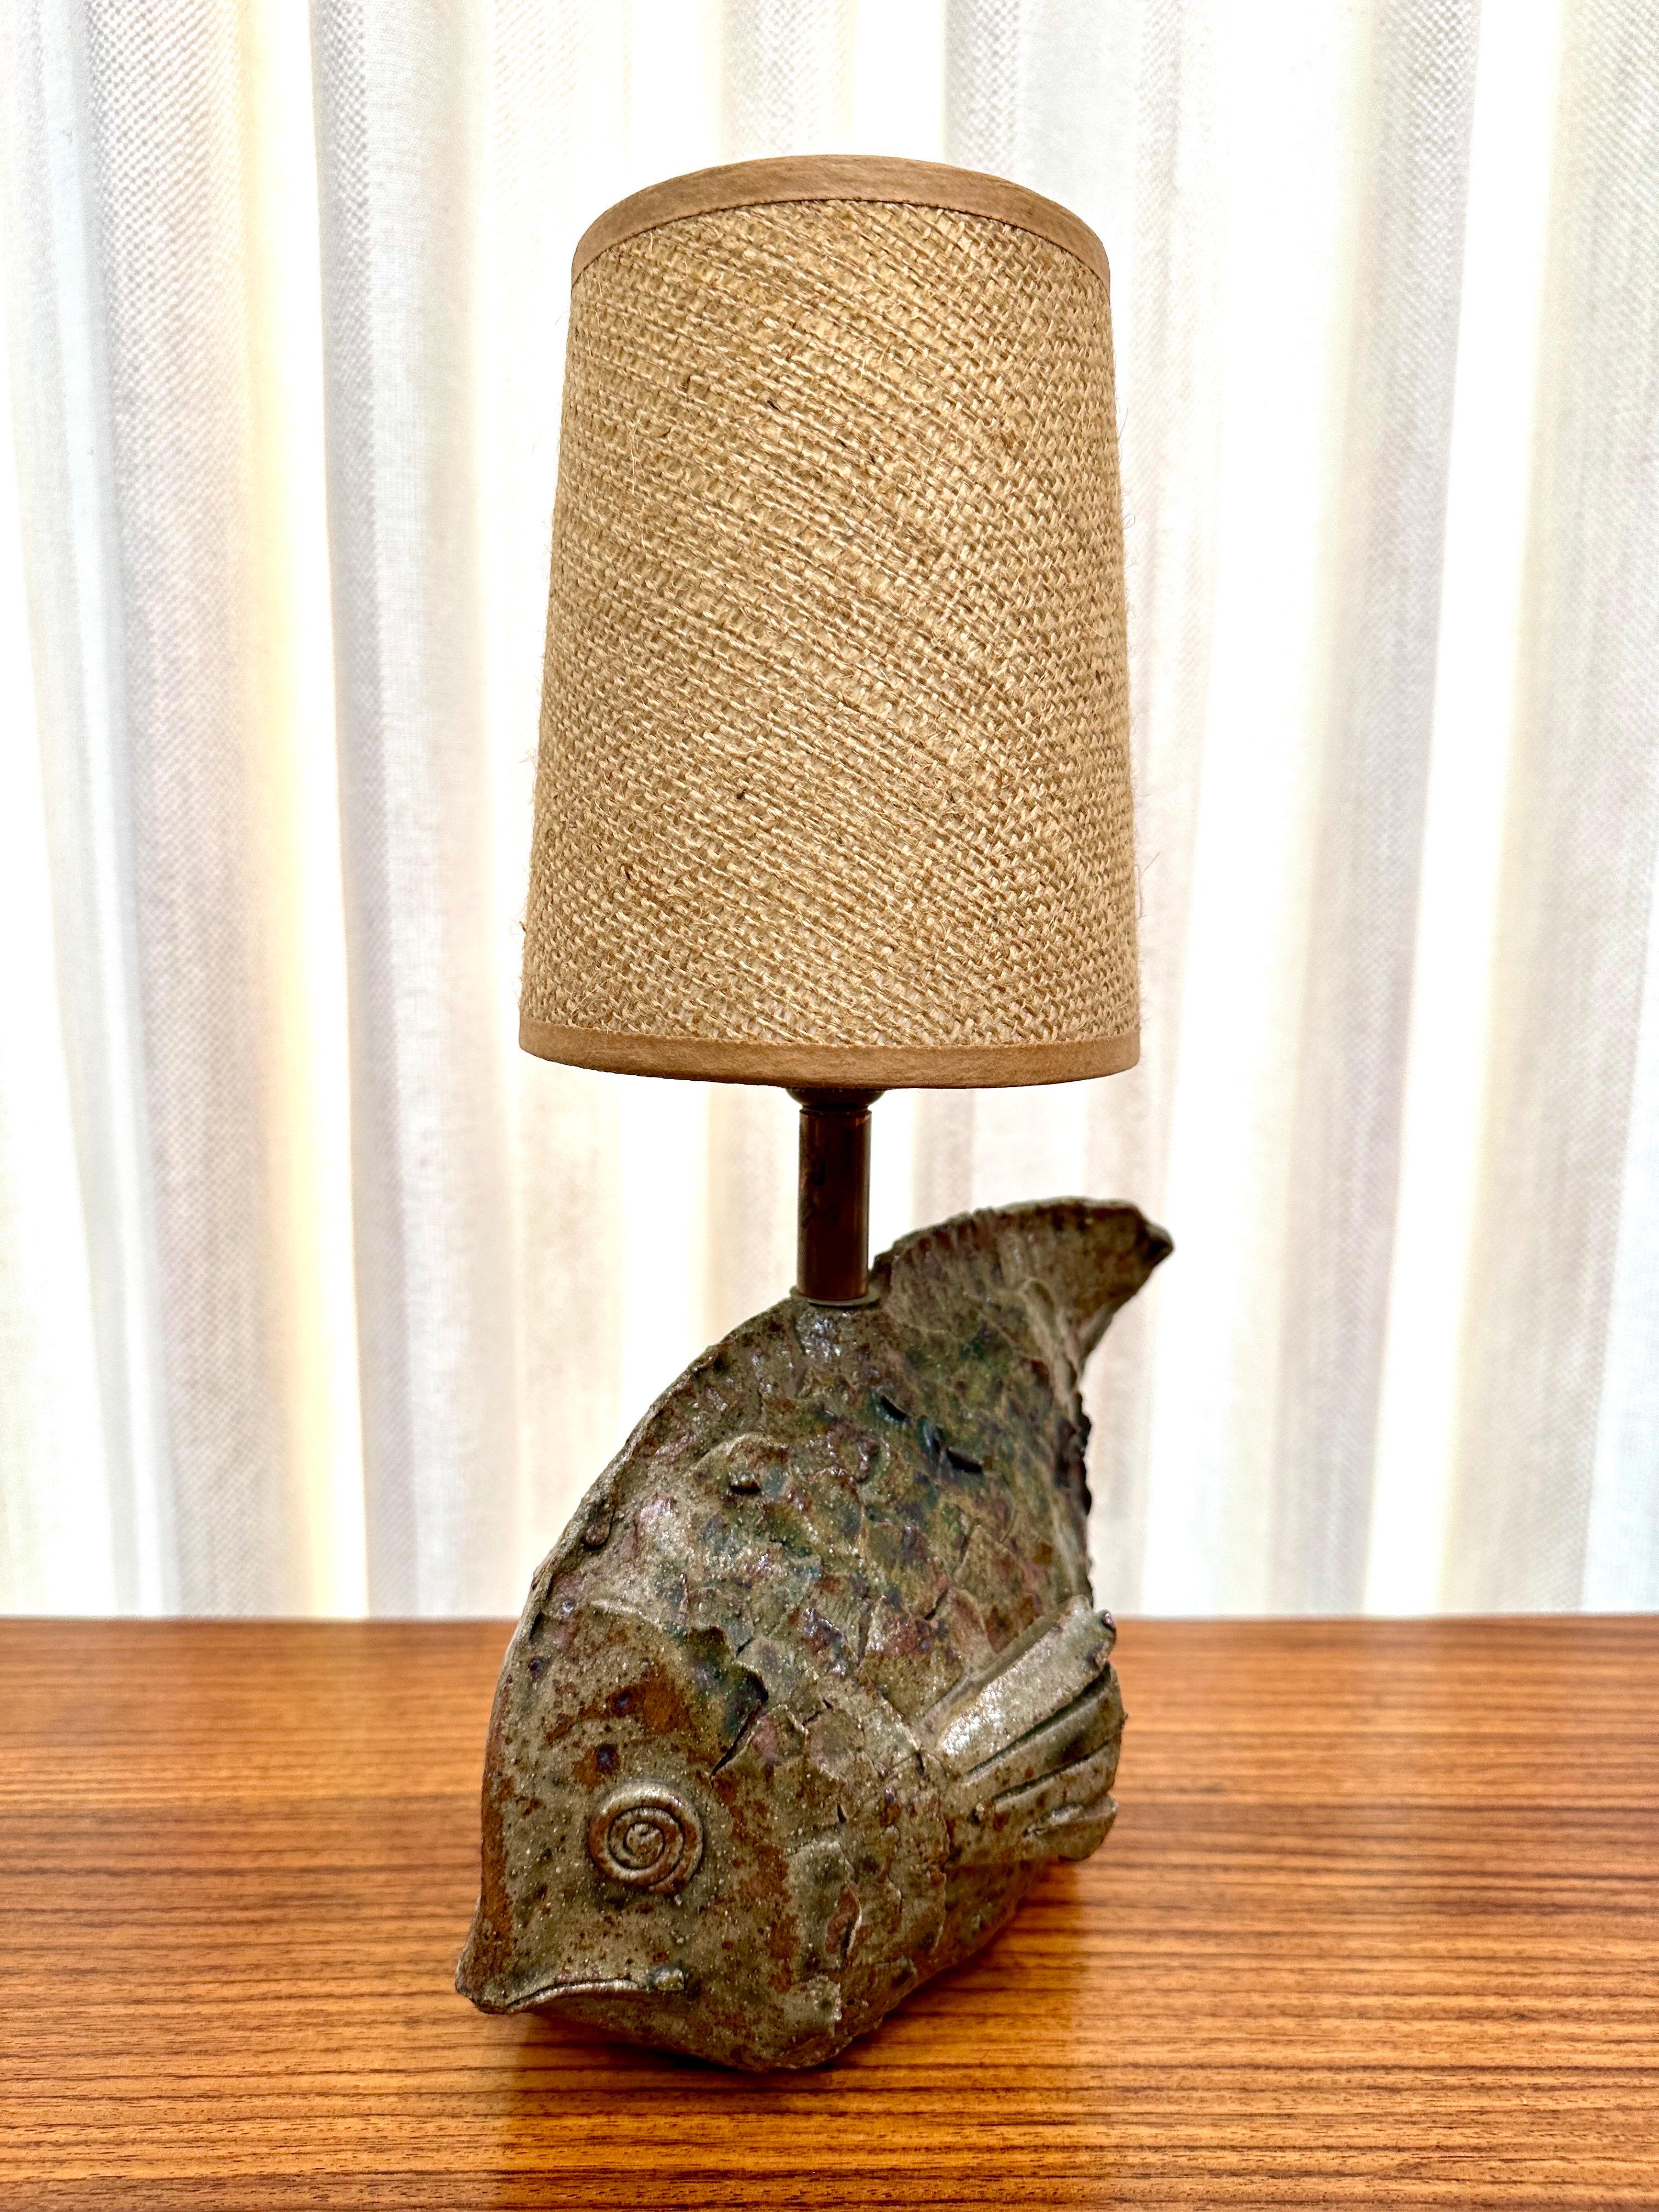 This petite and charming hand made earthenware fish design lamp has TONS of character and beautiful coloring.  See all images and video.  THIS ITEM IS LOCATED AND WILL SHIP FROM OUR MIAMI, FLORIDA SHOWROOM.